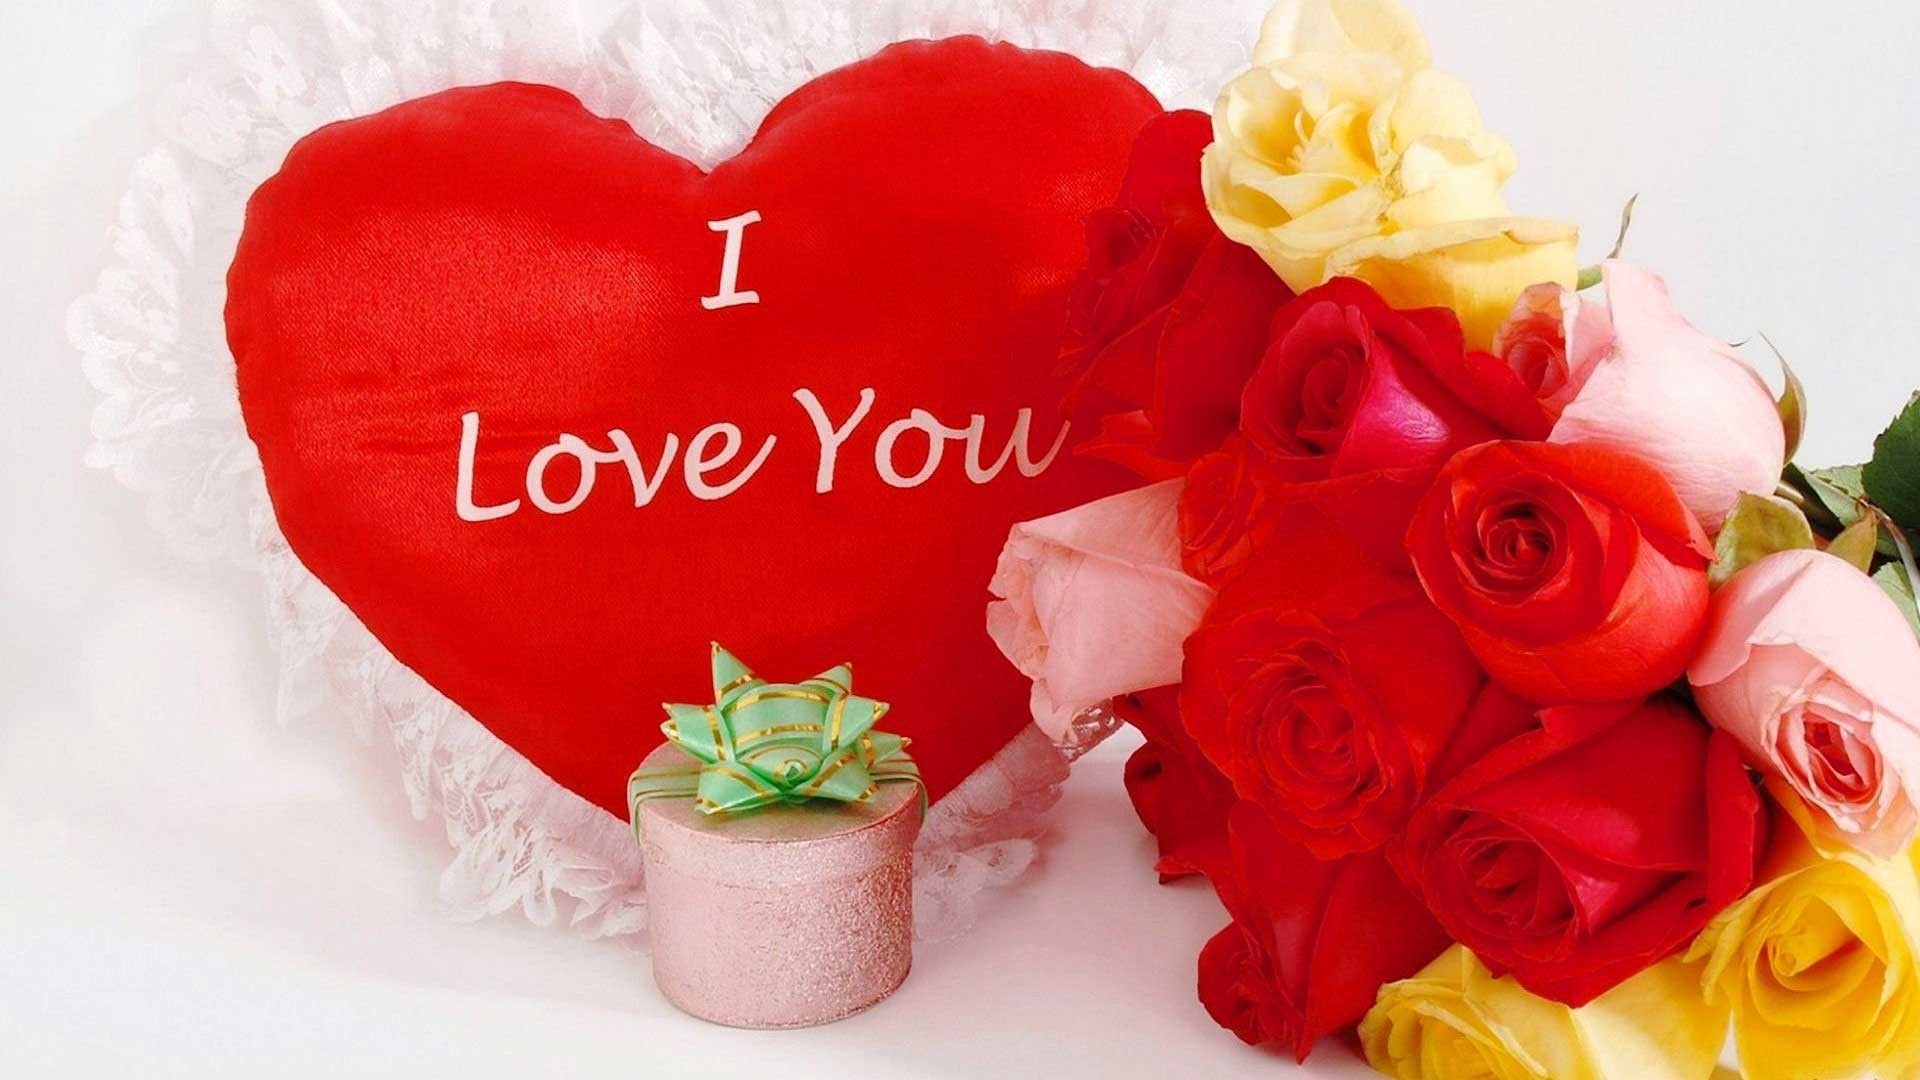 i love you wallpaper hd,red,love,heart,valentine's day,flower